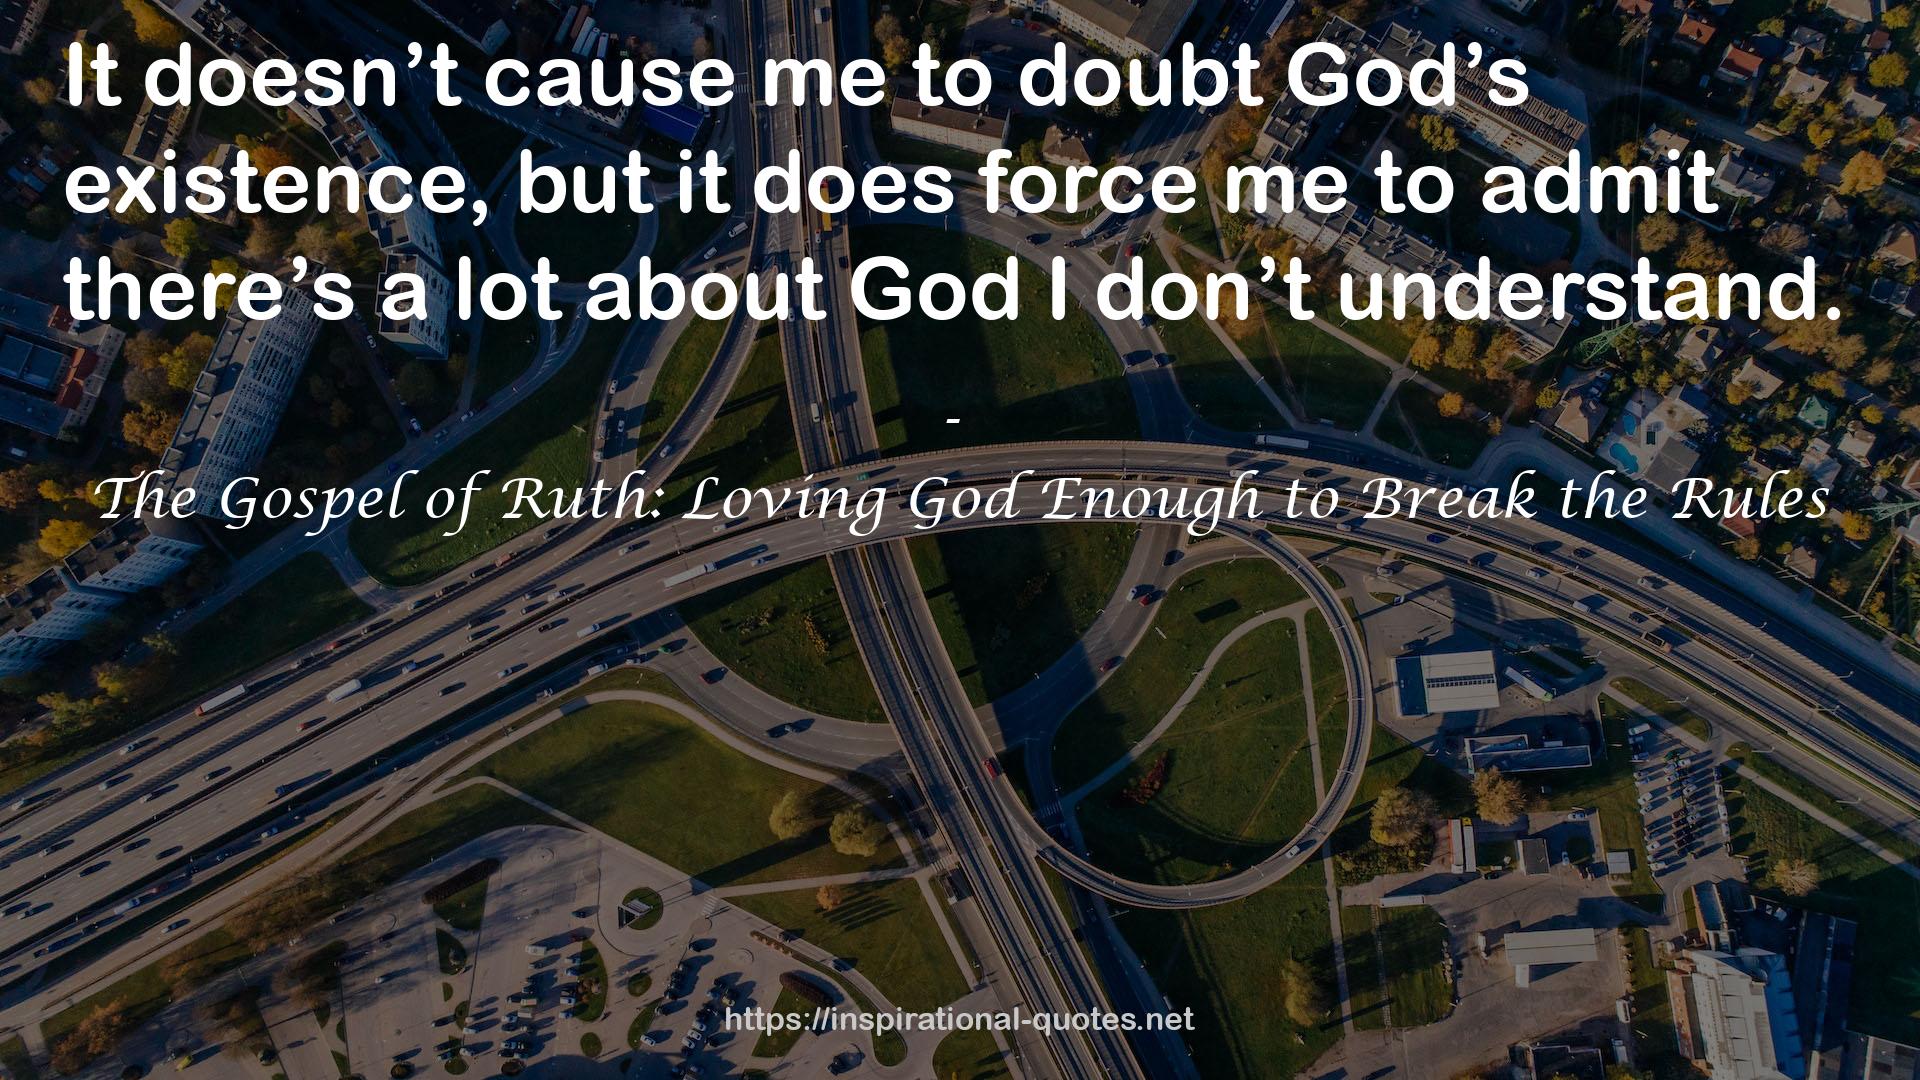 The Gospel of Ruth: Loving God Enough to Break the Rules QUOTES